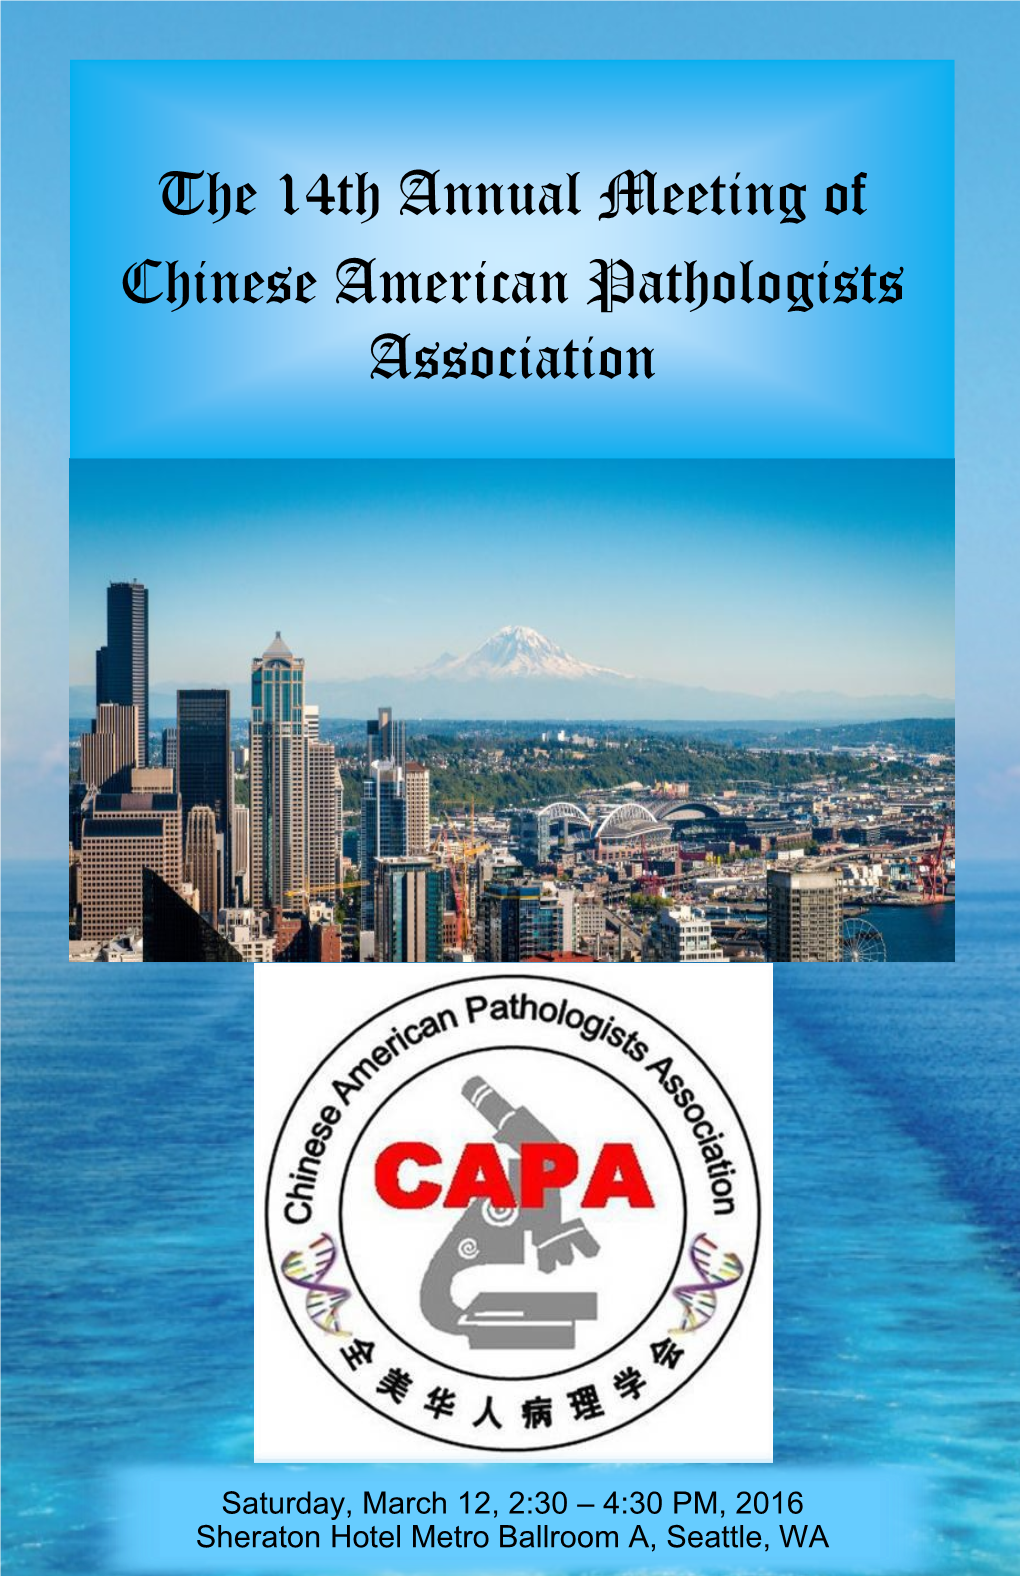 The 14Th Annual Meeting of Chinese American Pathologists Association